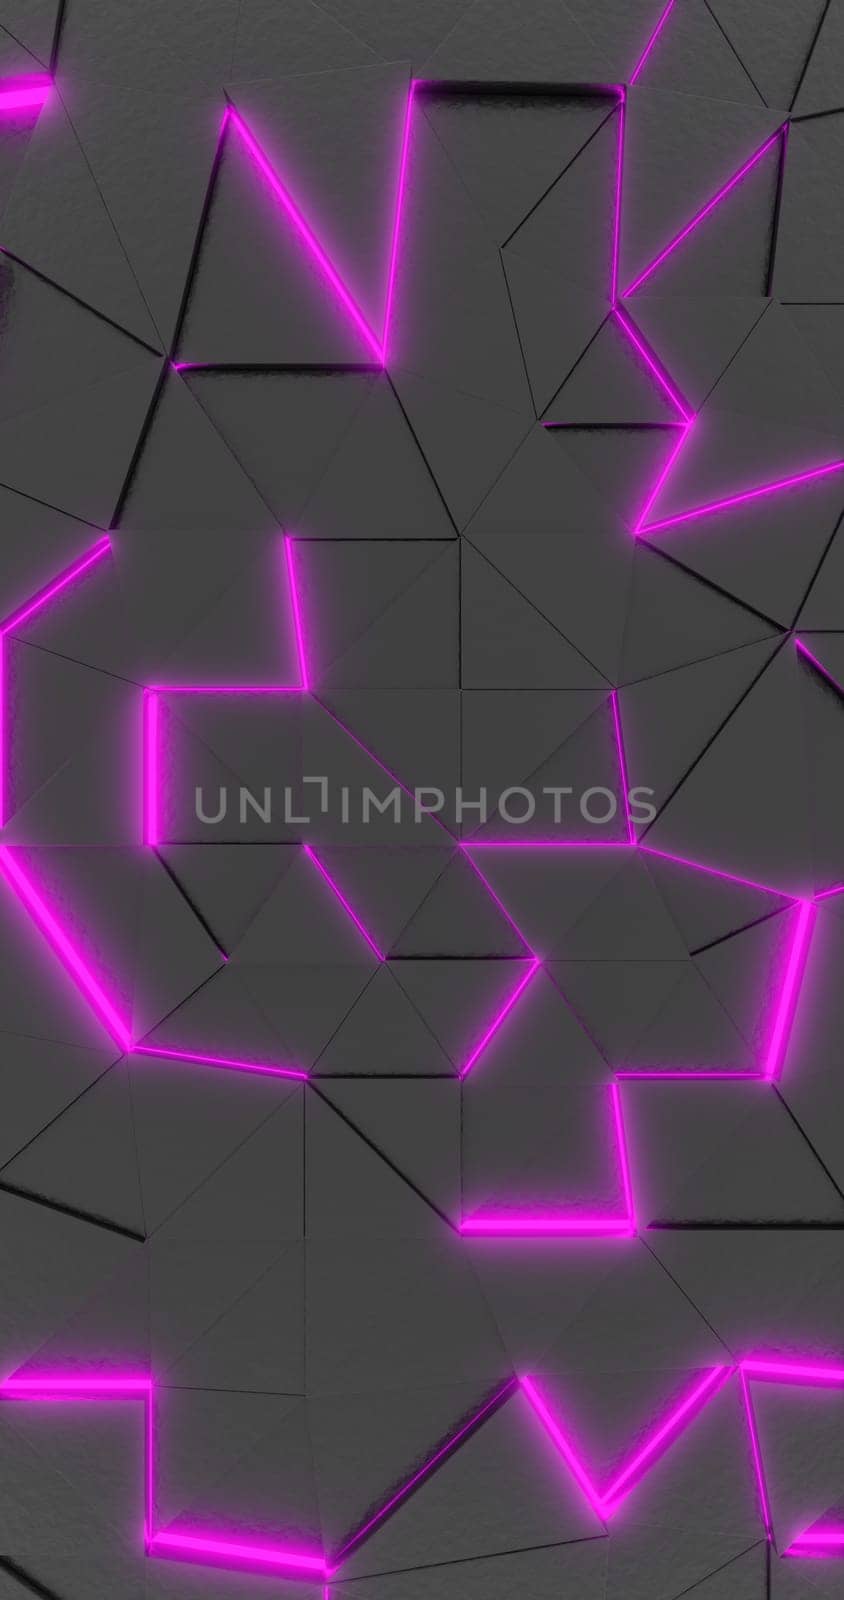 3d rendering. Geometric background with bright pink neon elements. Phone background